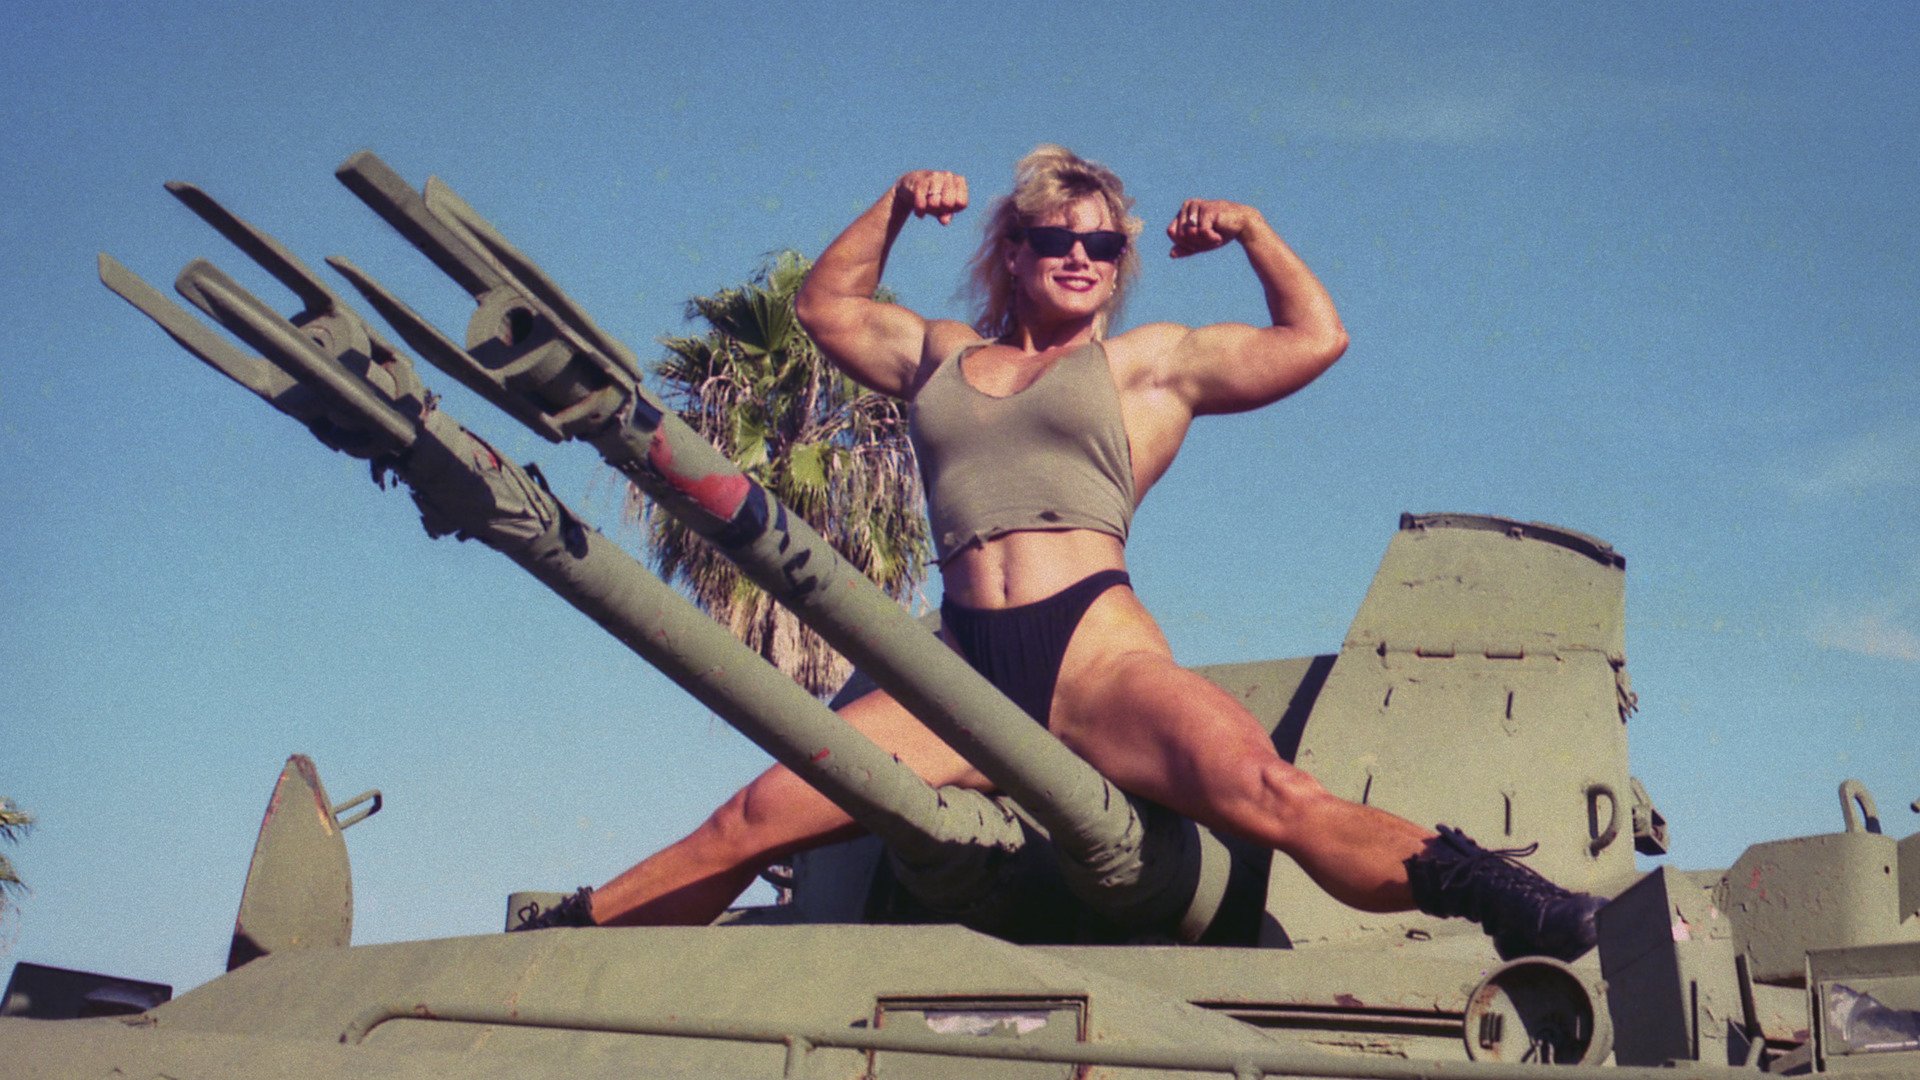 Sally McNeil flexes for a photo from her time in the military